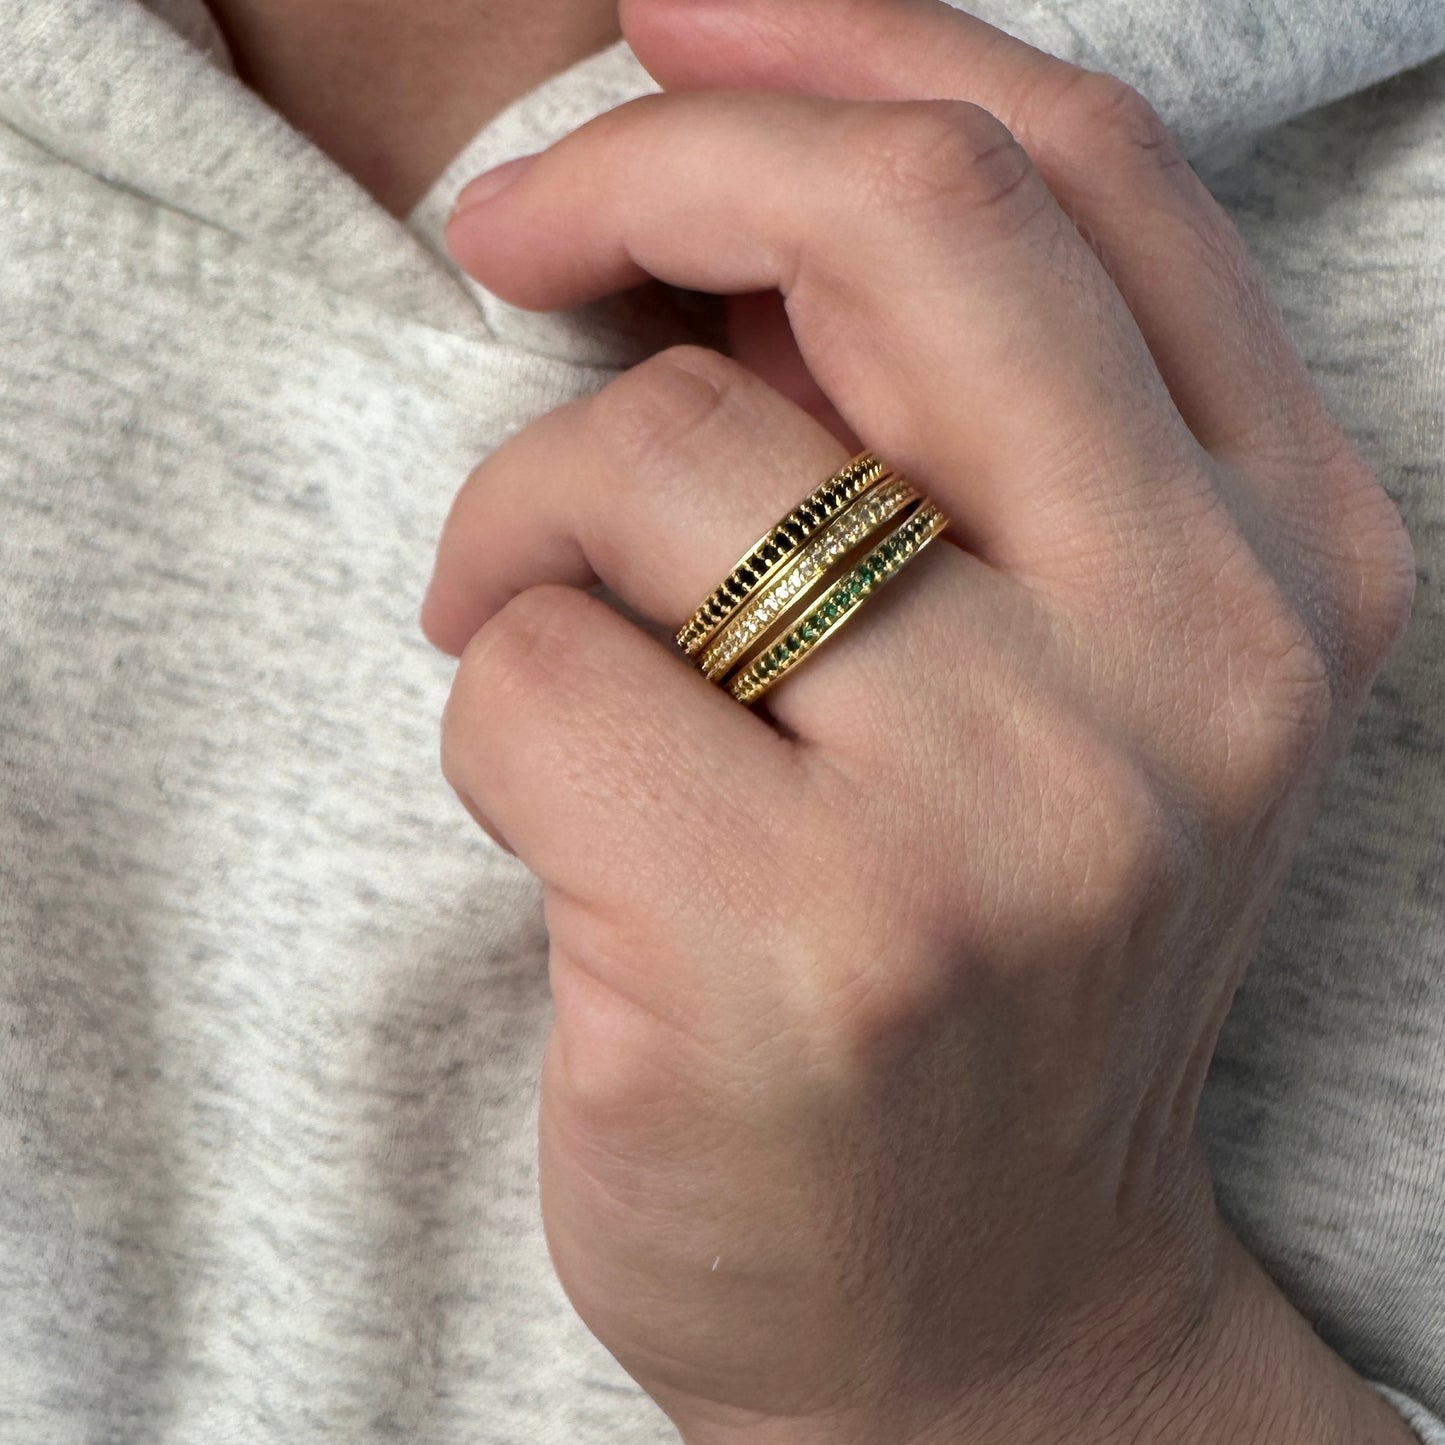 18k Gold Filled Eternity CZ Band Ring